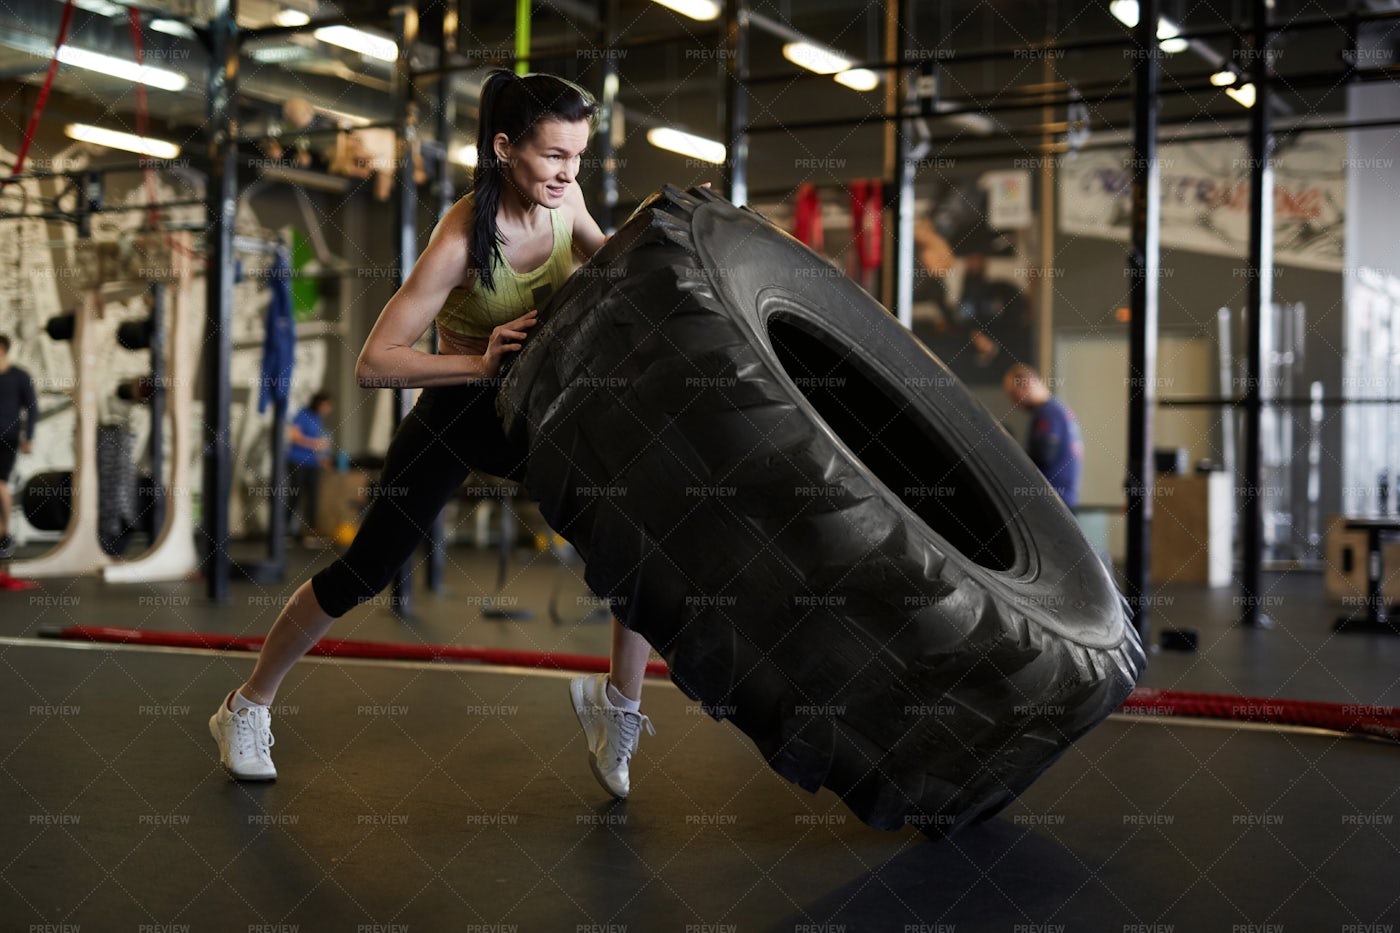 Woman Flipping Truck Tire In Gym: Stock Photos